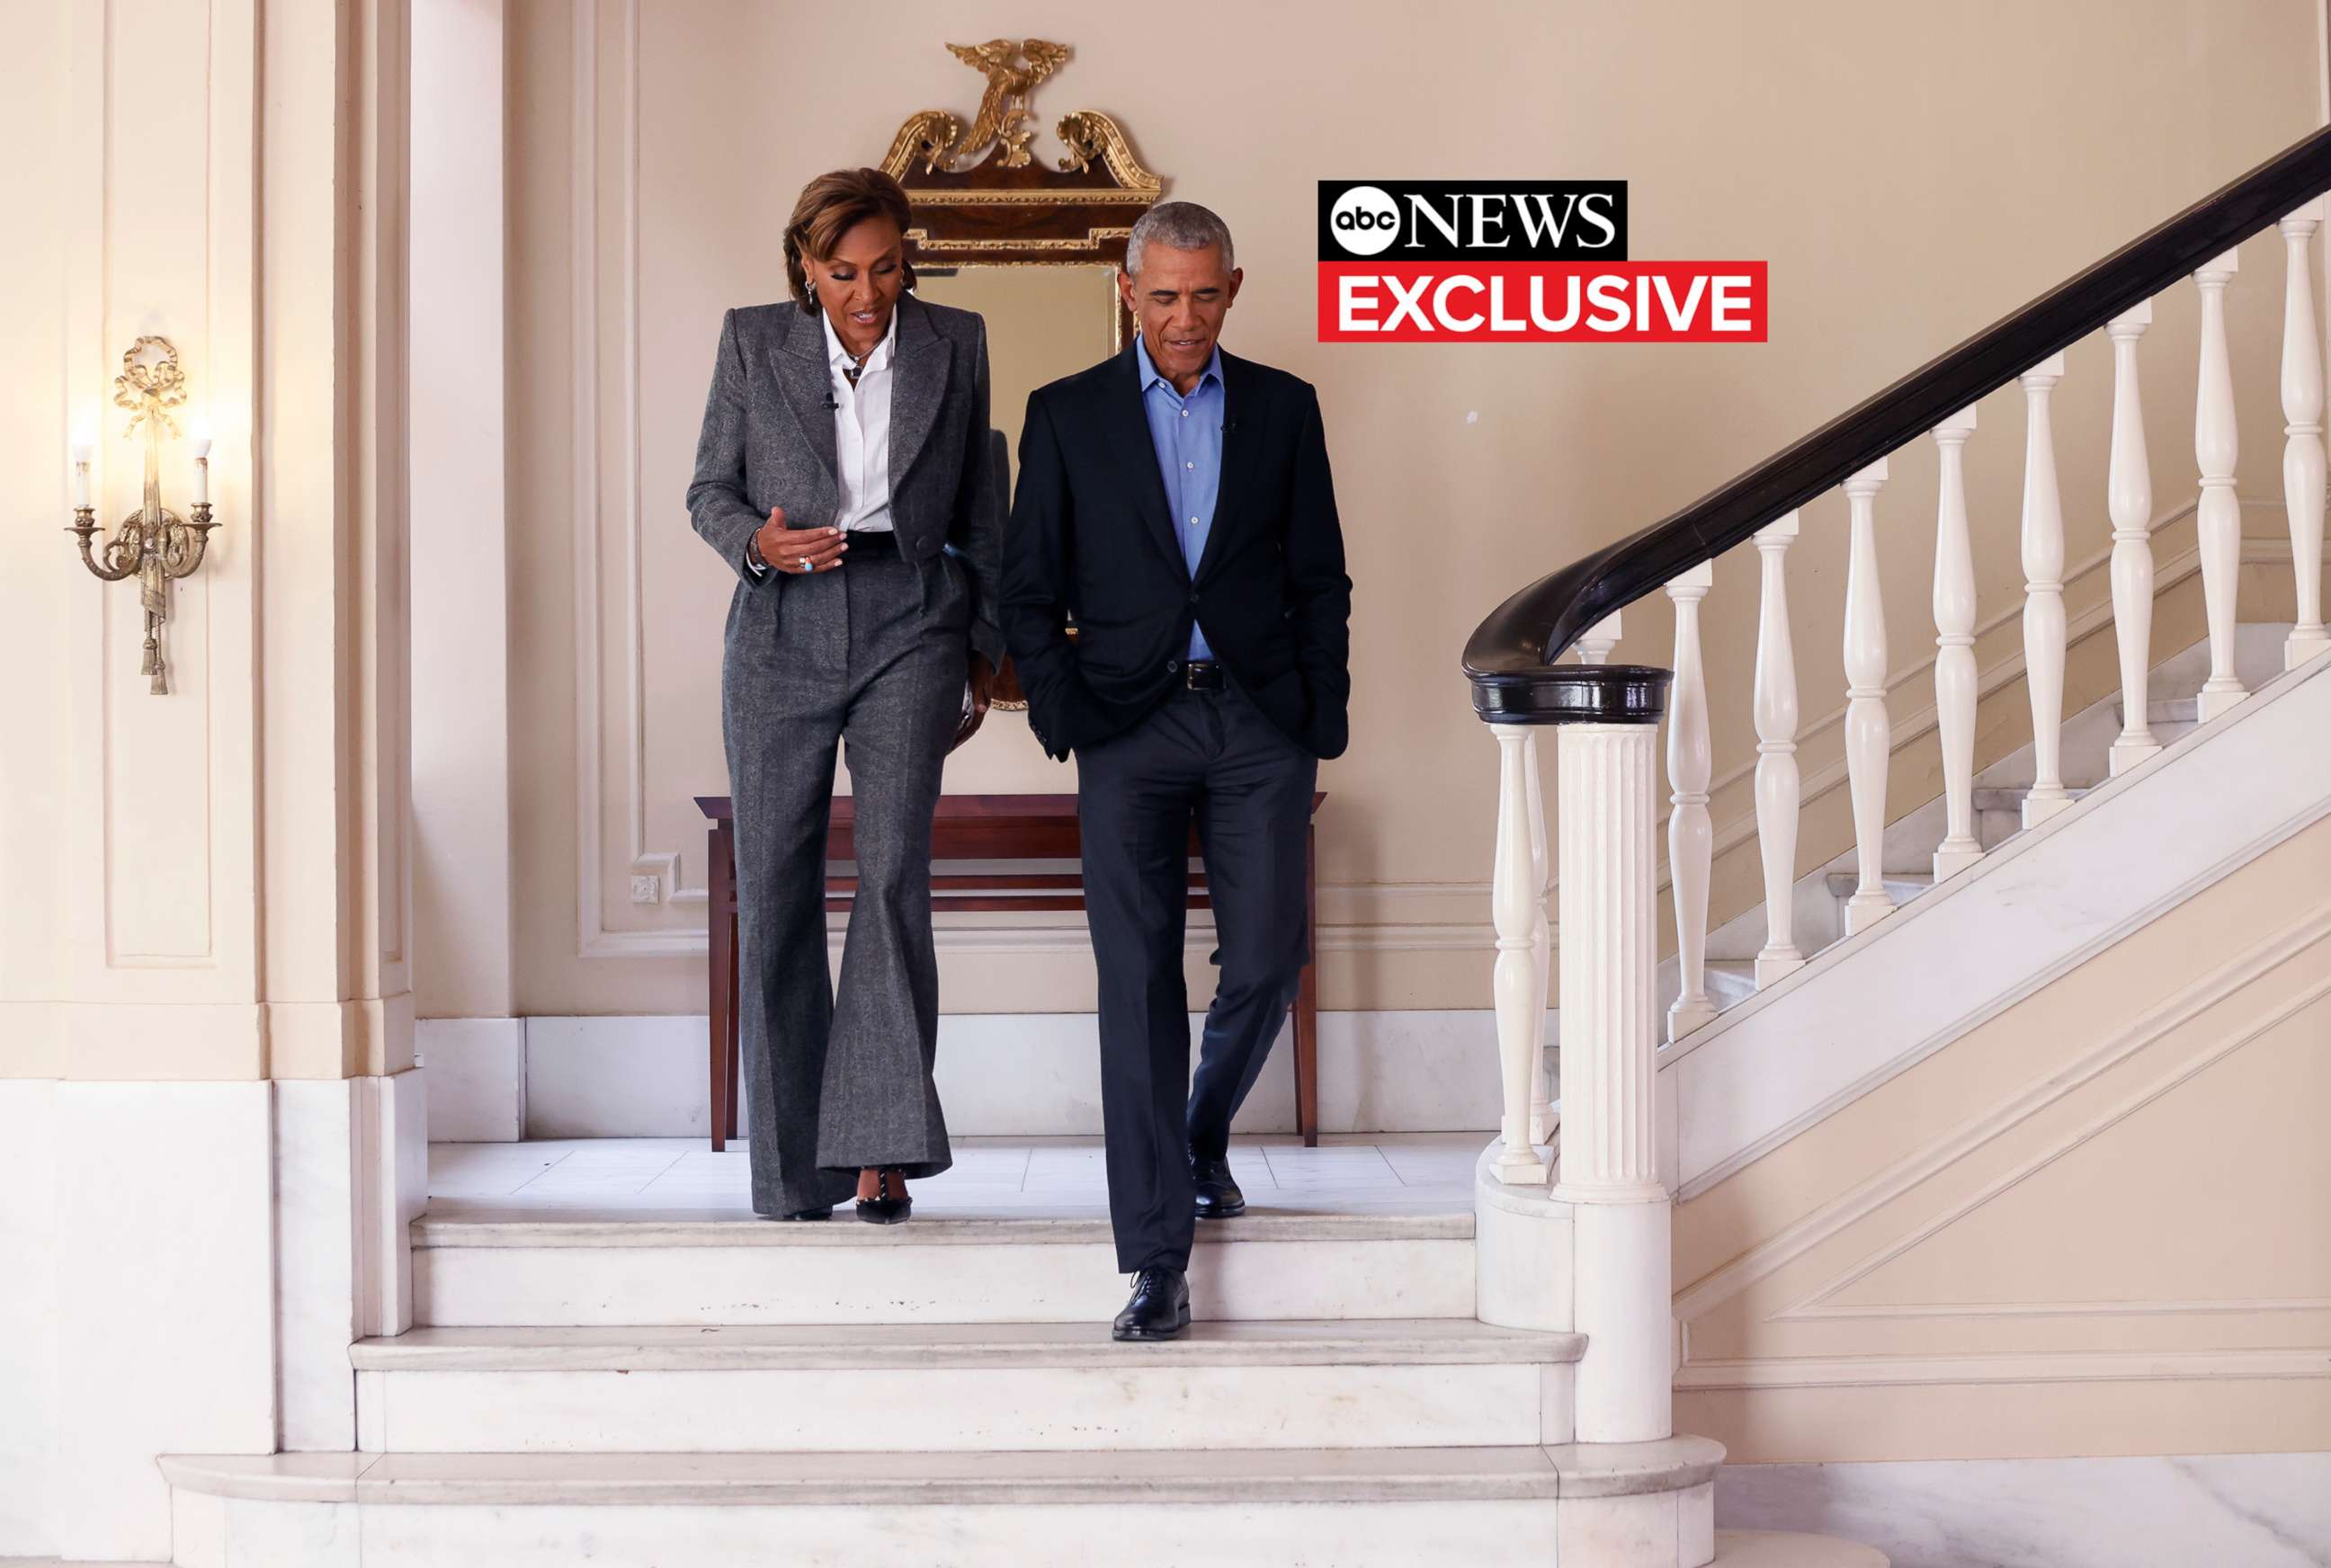 PHOTO: "Good Morning America" co-anchor Robin Roberts sat down with former President Barack Obama for an interview in Chicago ahead of the Obama Presidential Center groundbreaking, Sept. 26, 2021.